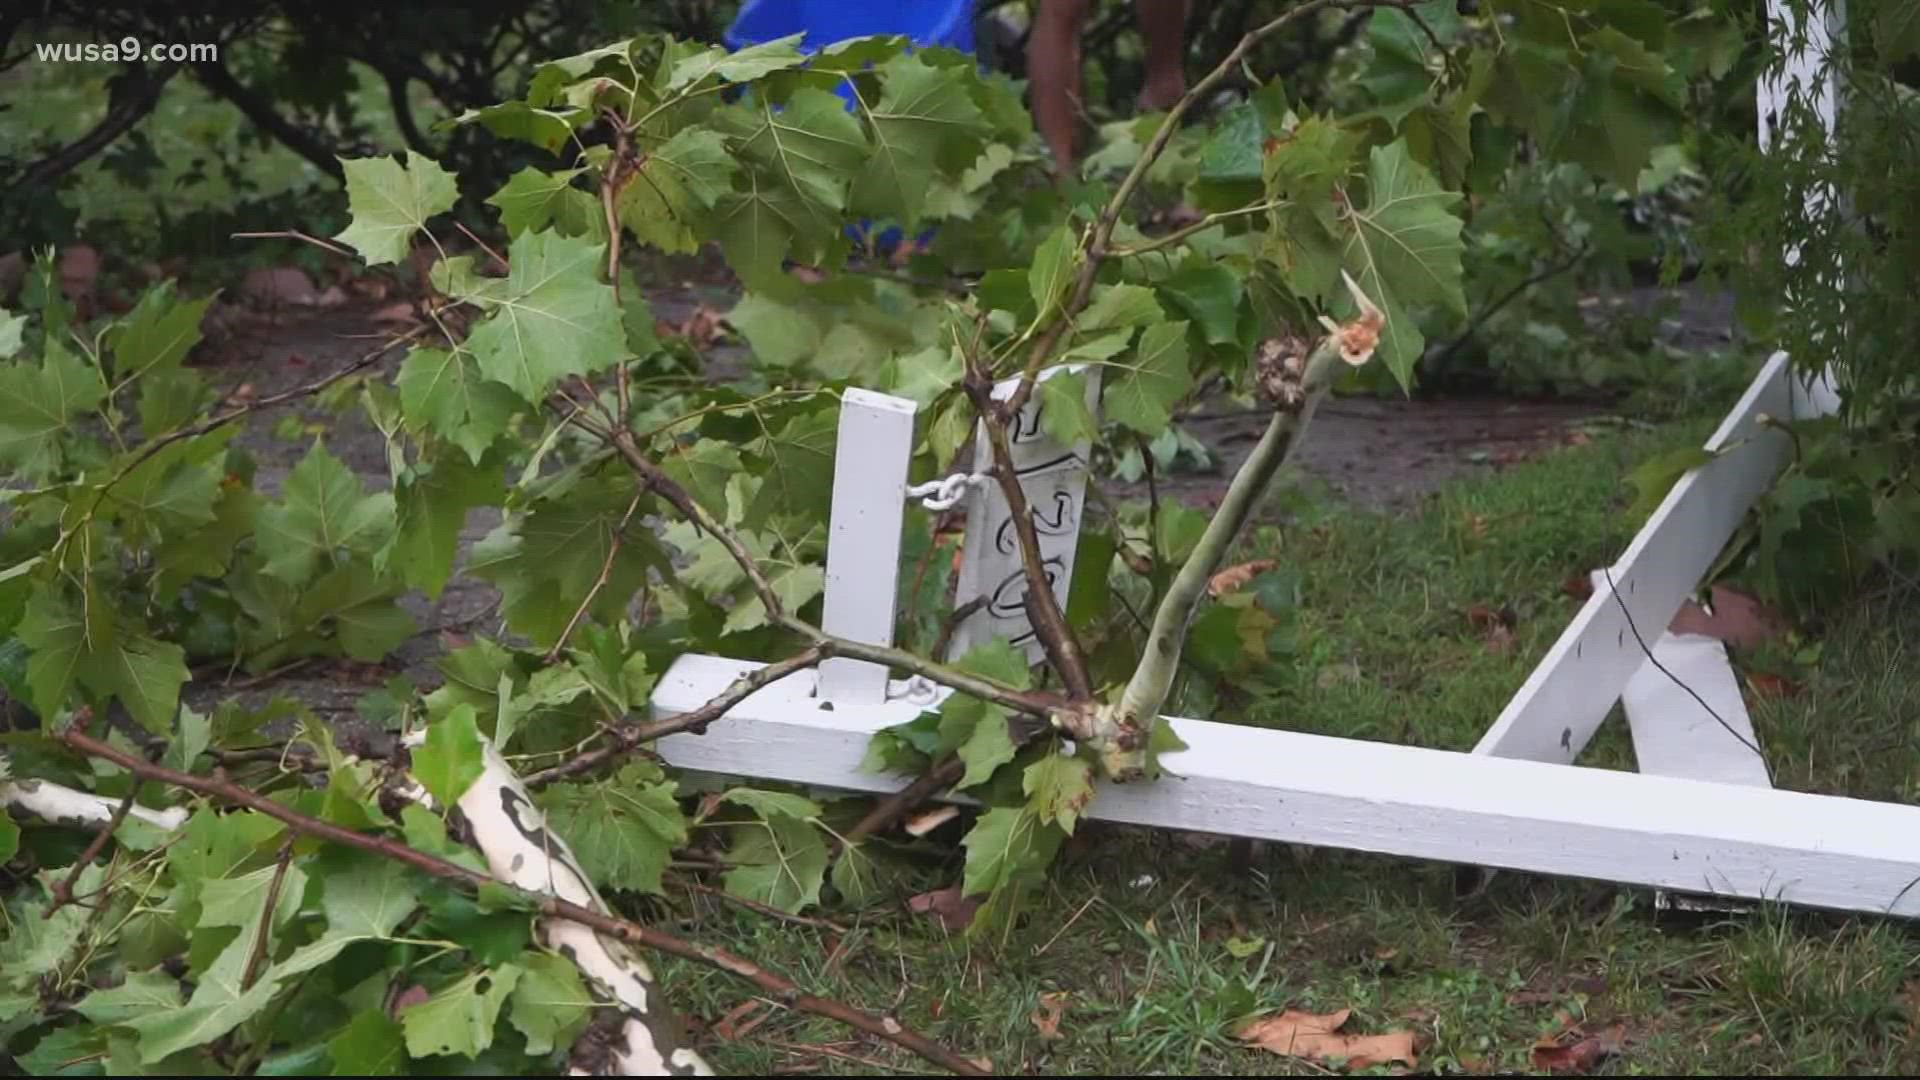 There's a lot of clean-up happening Thursday morning after strong storms moved east of Interstate 95 Wednesday evening bringing damaging winds, heavy downpours.